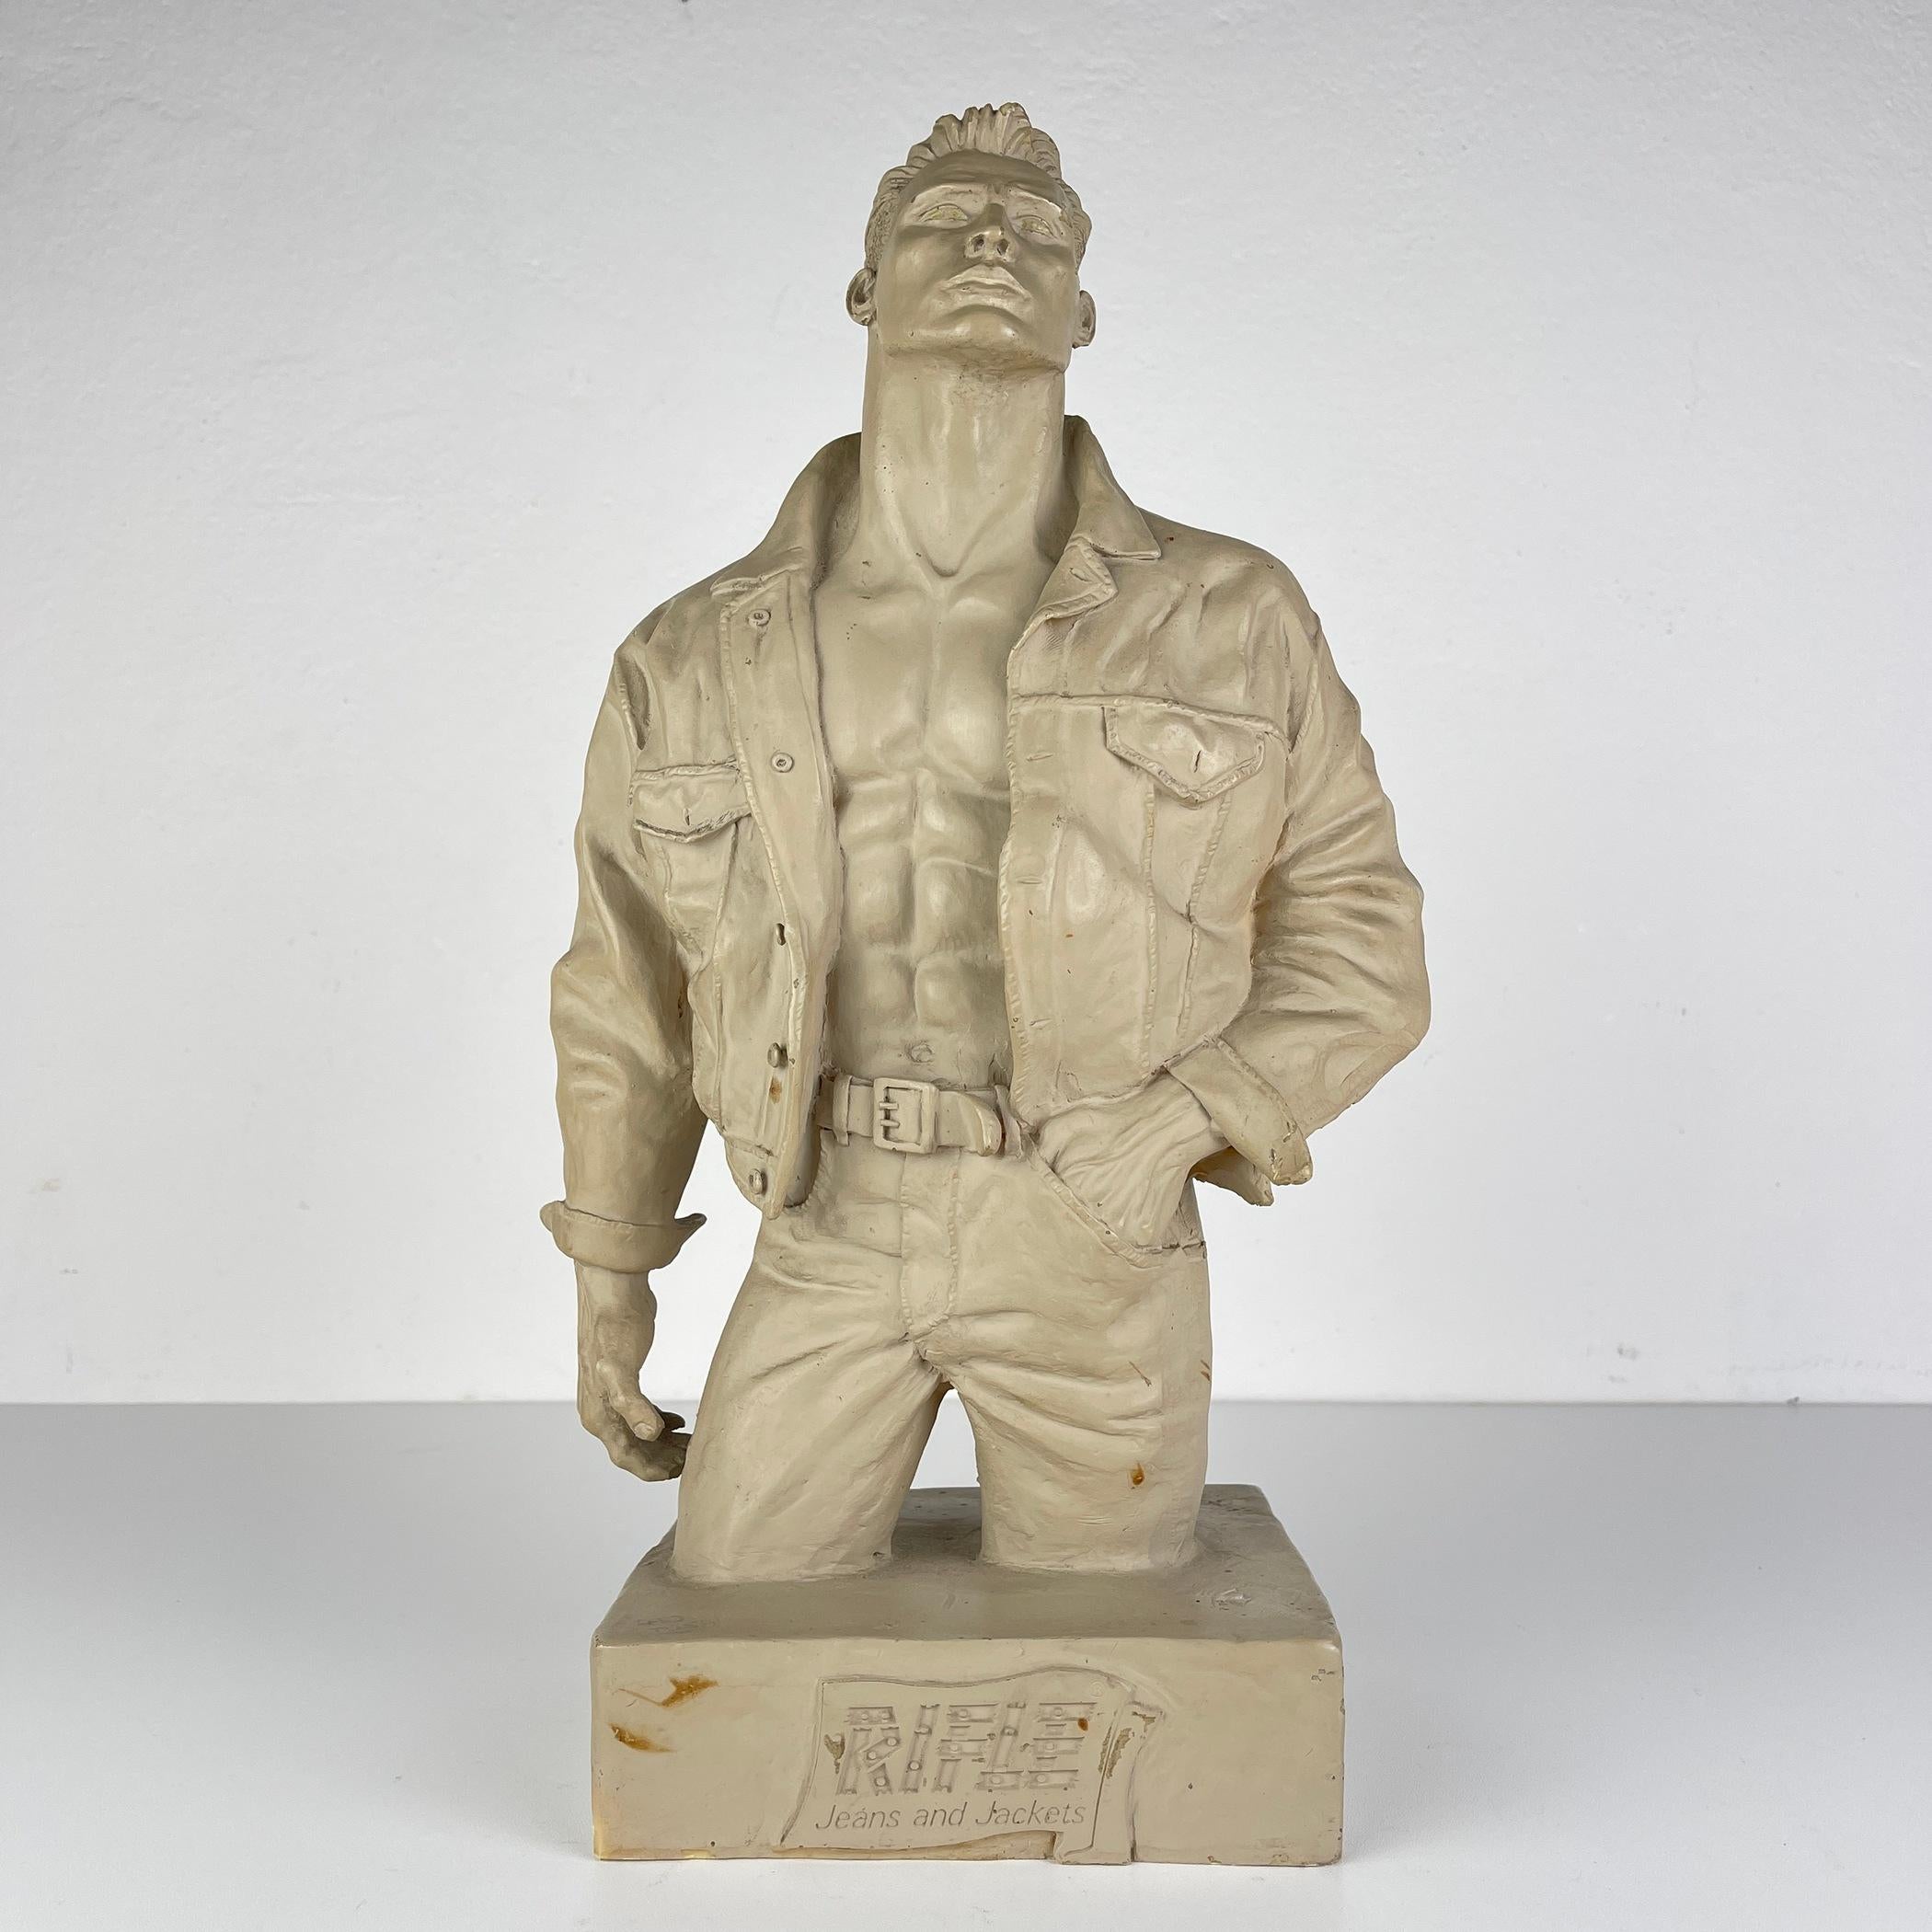 Introducing this unique statue, embodying a brutal style and cult image. Its appearance inspires awe, especially under various lighting conditions. Weighing around 12 pounds (5,5 кг), it possesses both strength and a weightiness, seemingly crafted